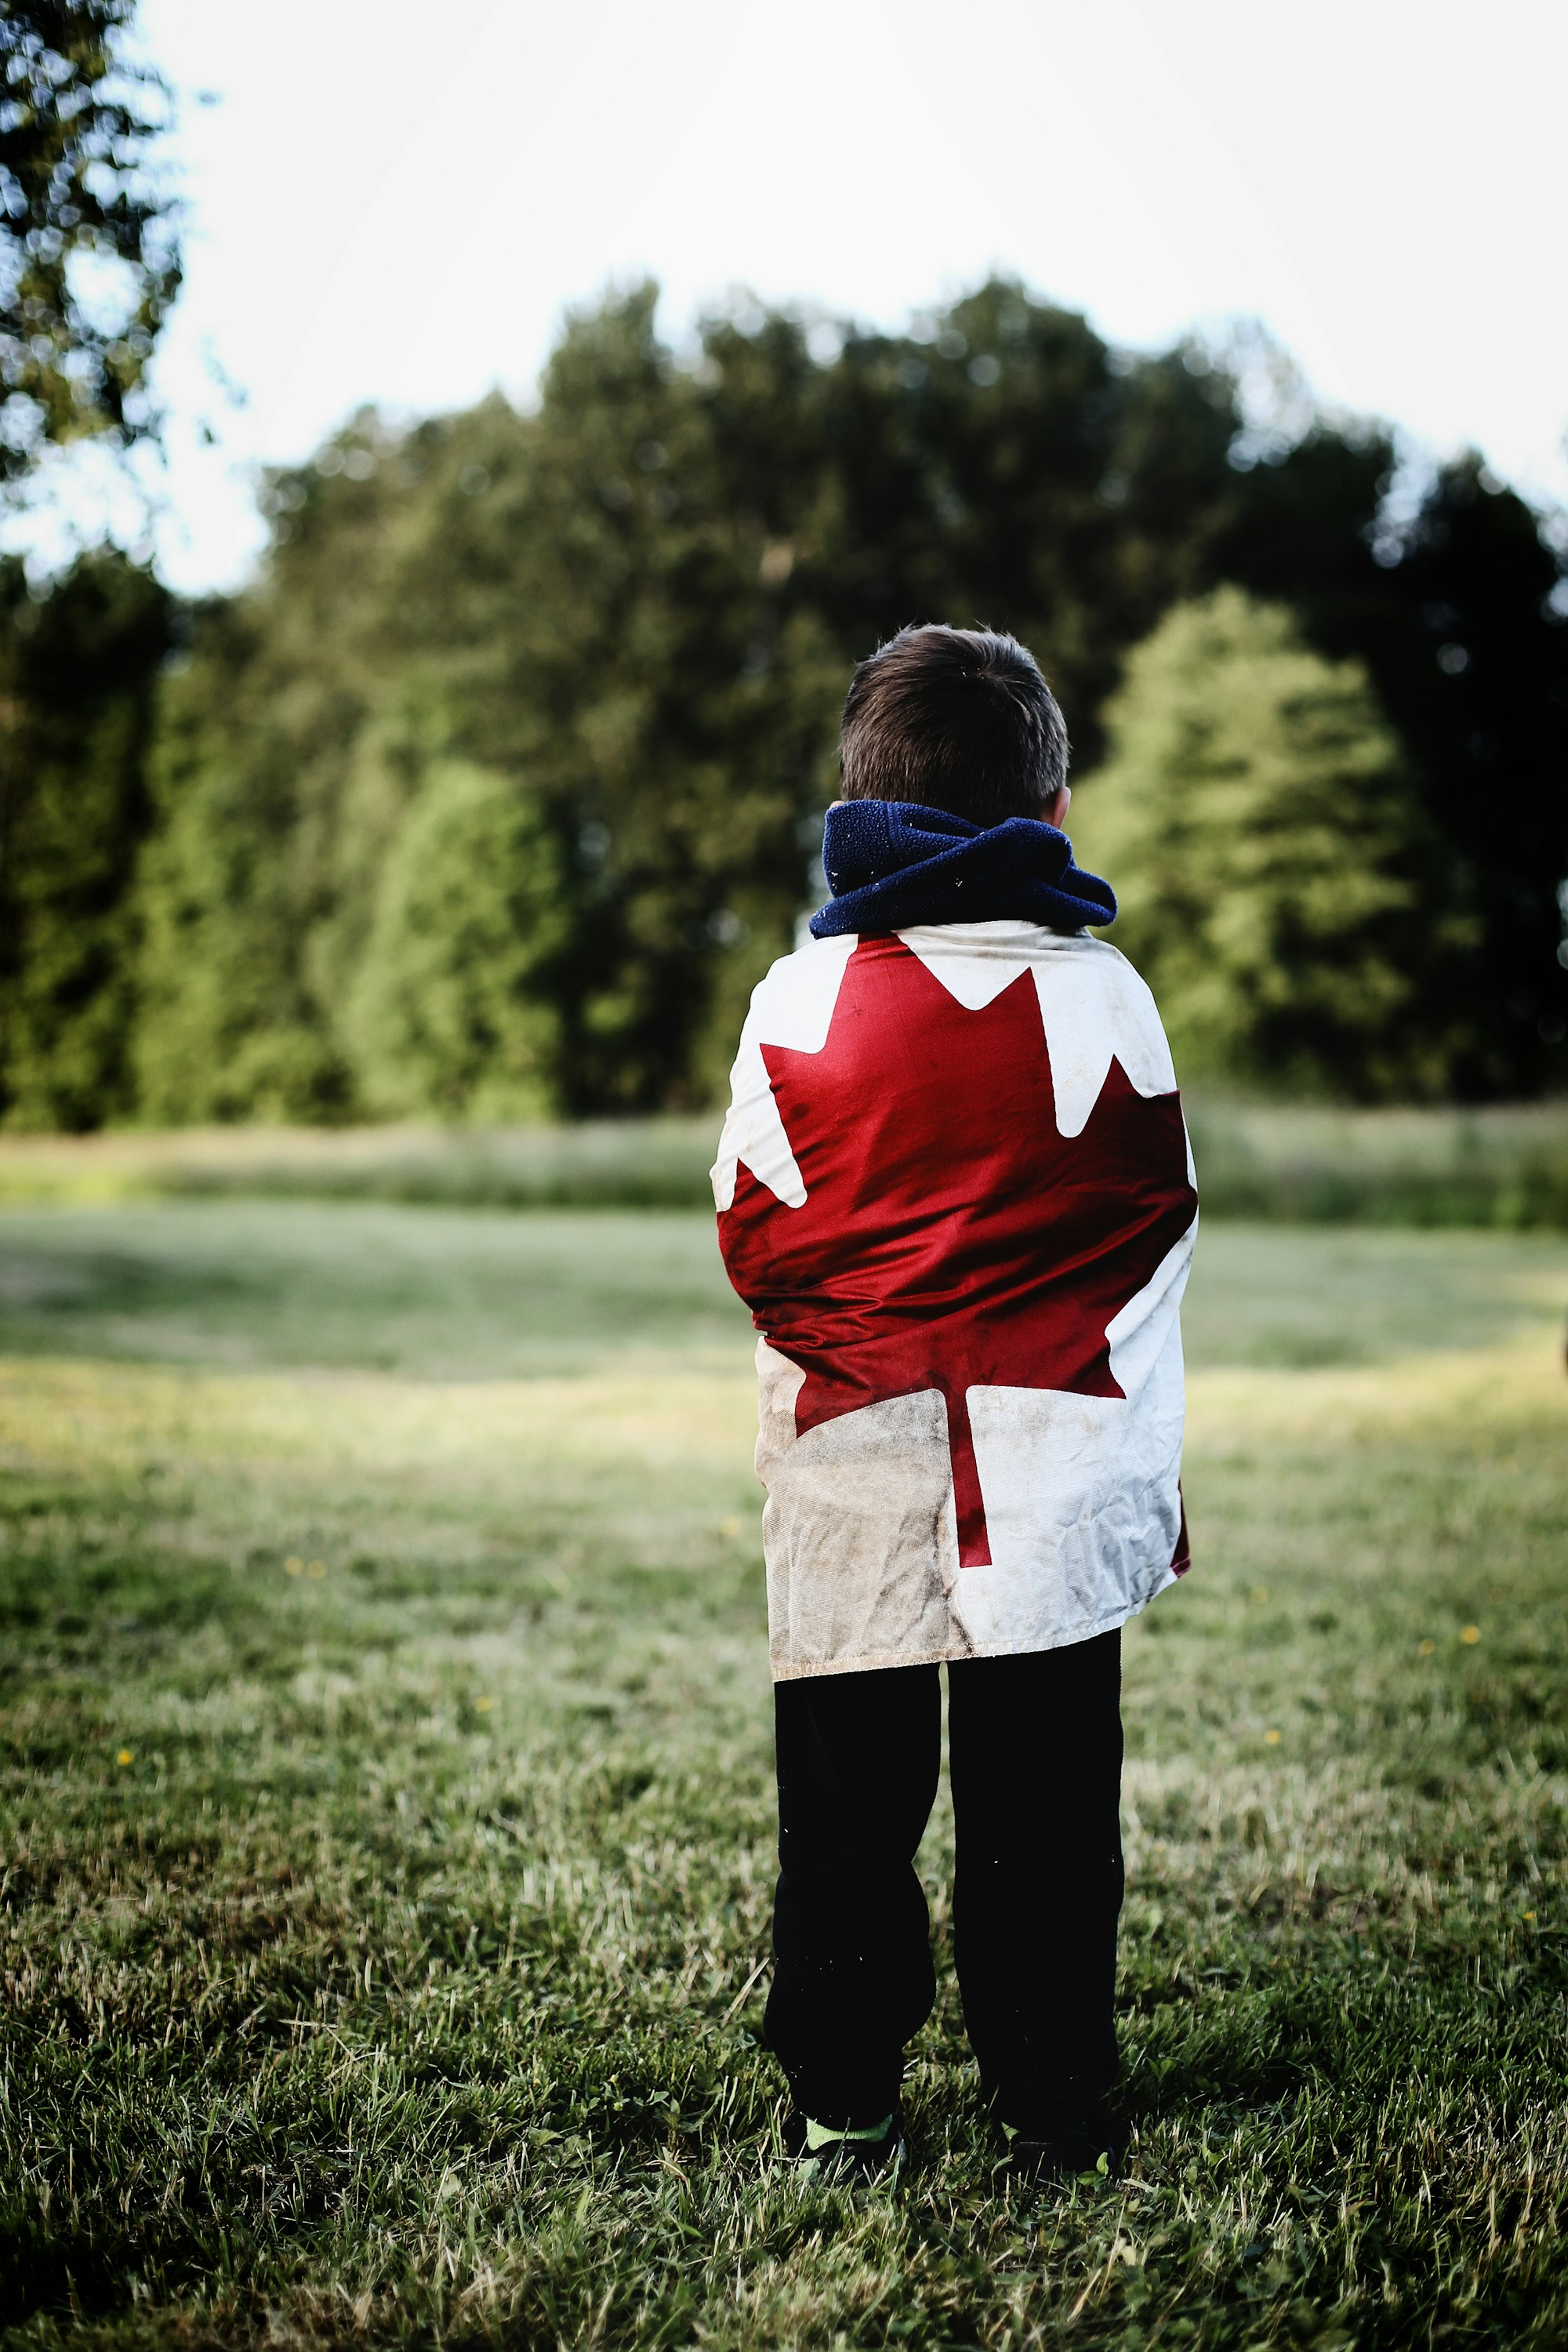 Blog: The Educational Experiences of Military-Connected Students in the K-12 System: A Canadian Perspective